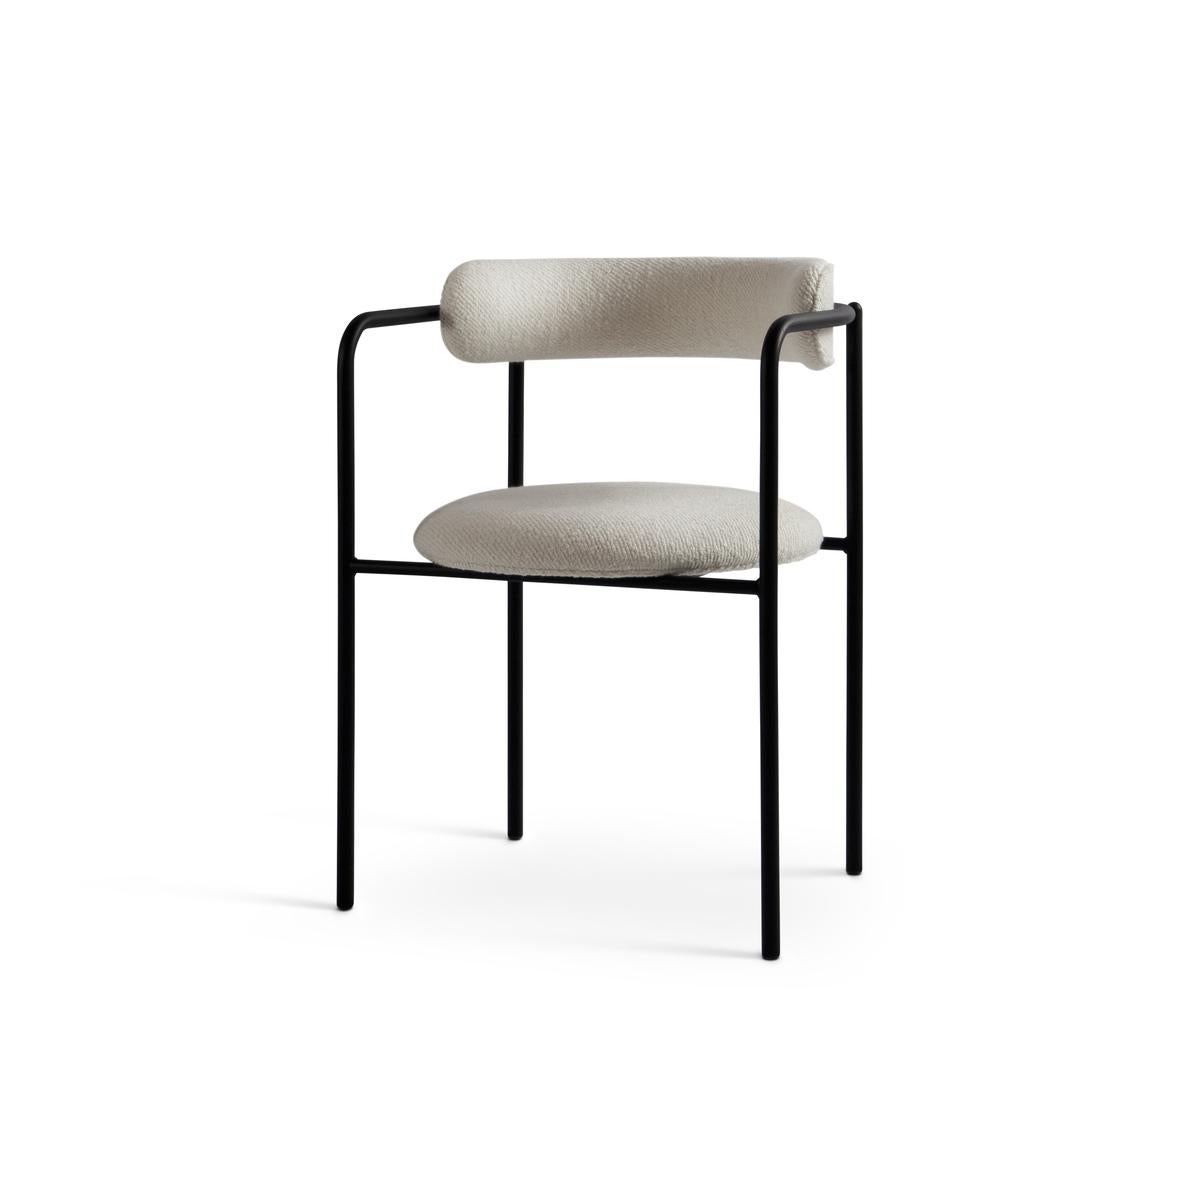 Contemporary Chair 'FF 4-Legs', Vidar Fabric, Black 1880 and White 1880 For Sale 8